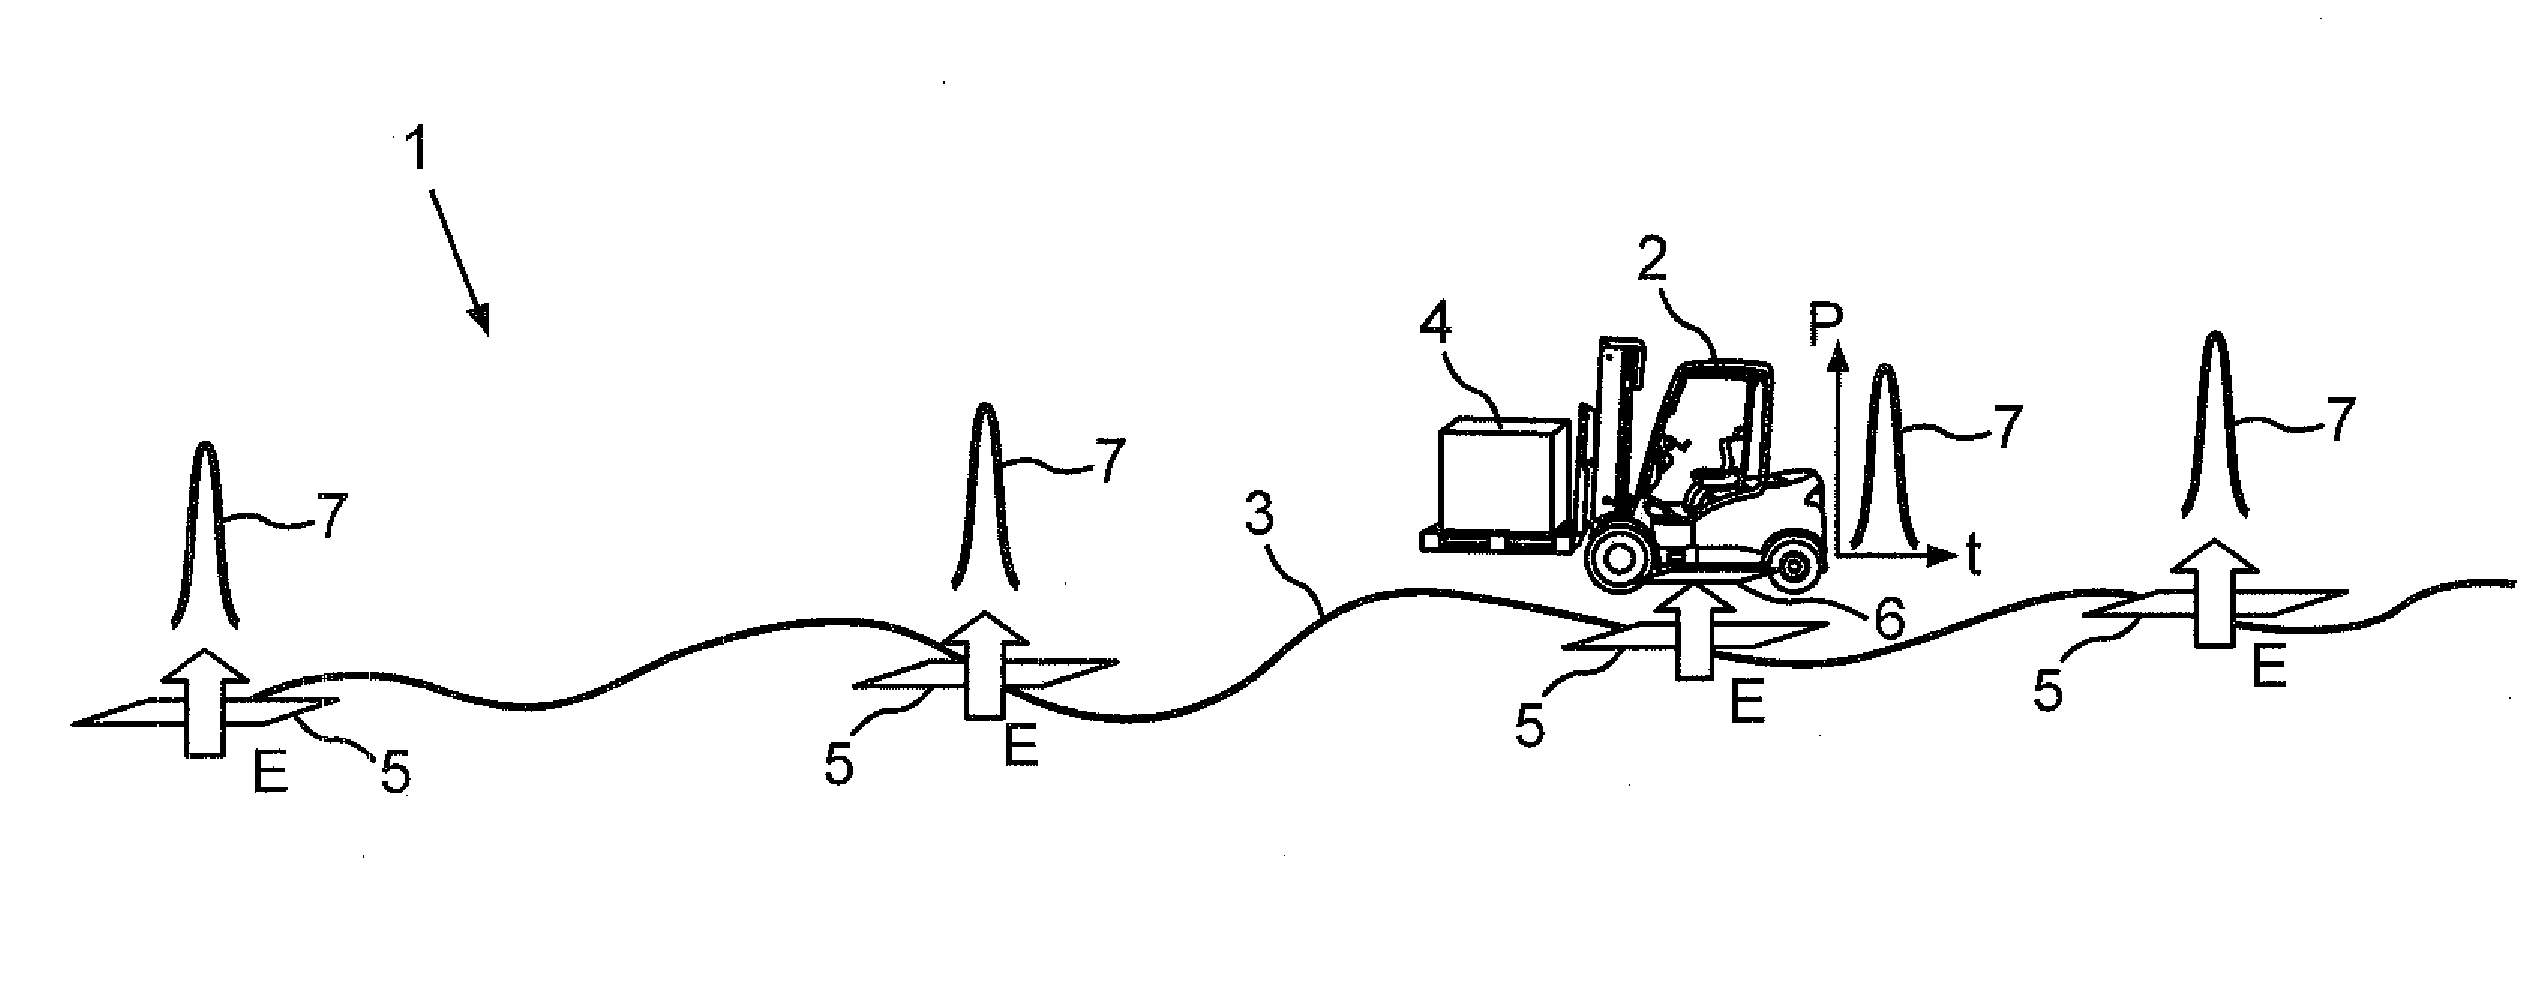 Electric vehicle with fast-charge function